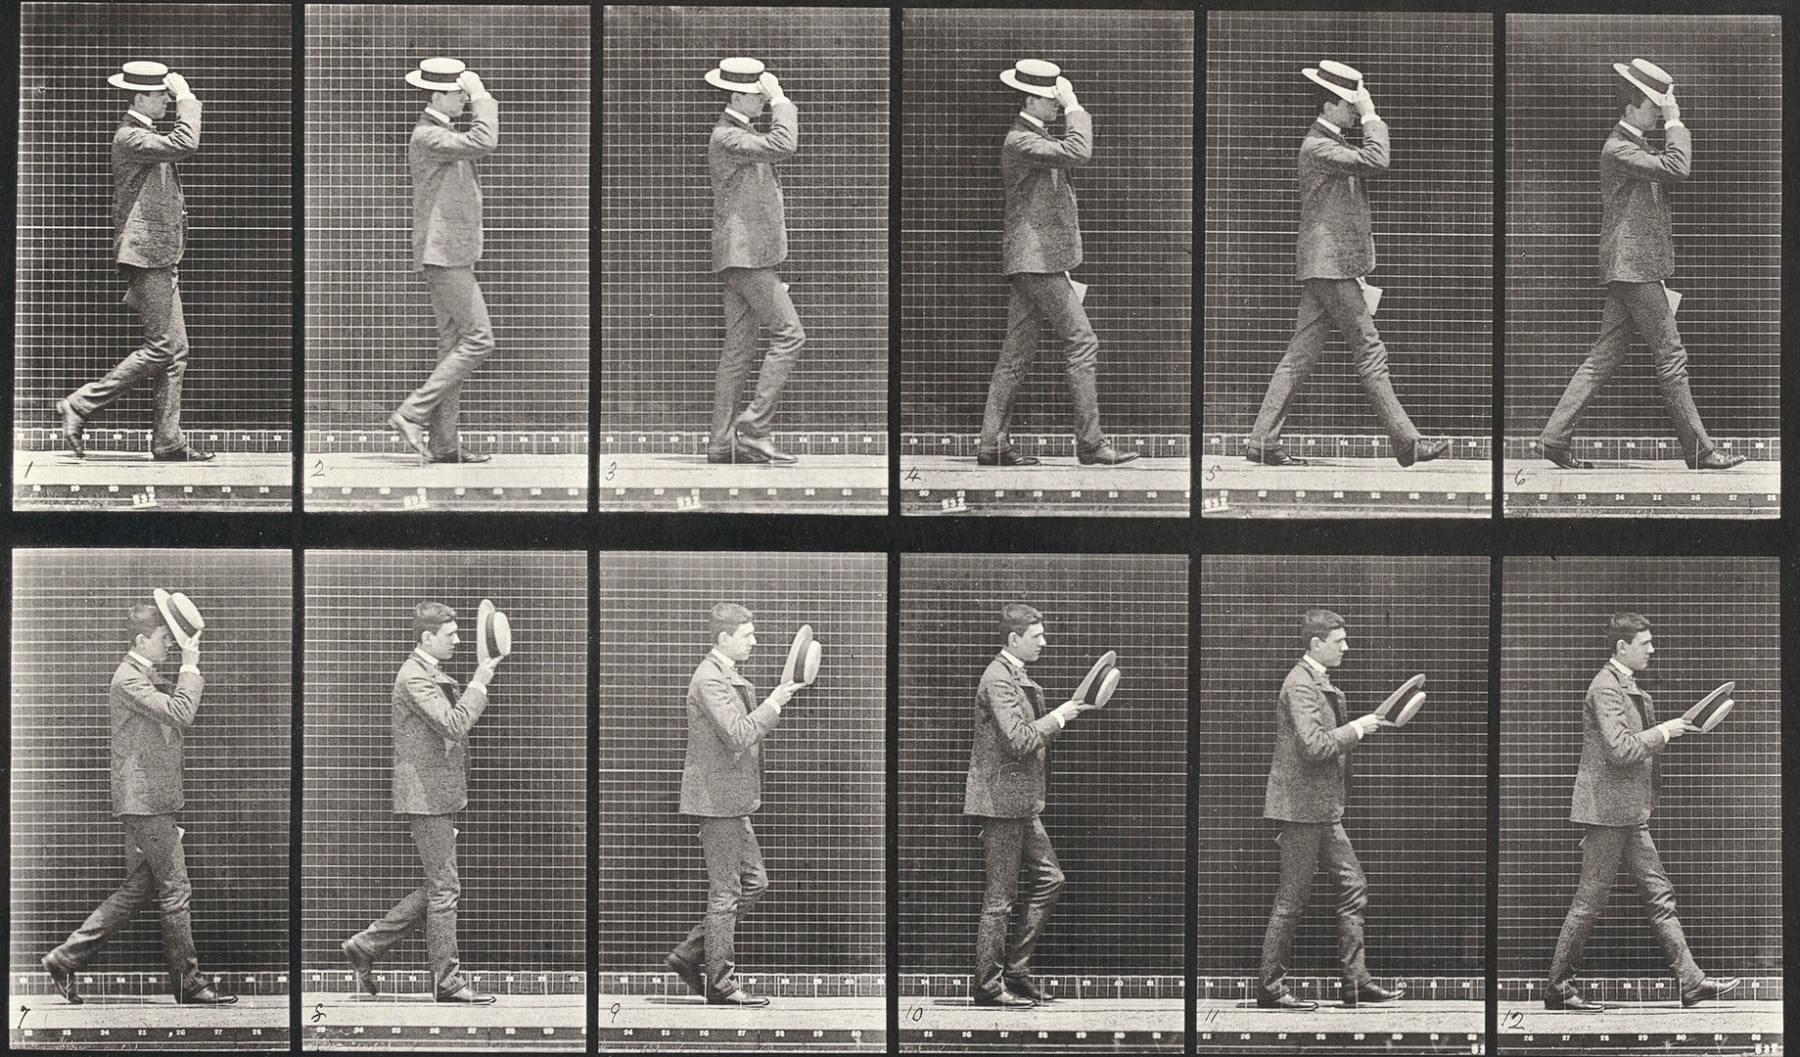 Sequence of black and white photos showing a well dressed man walking and taking off his hat.